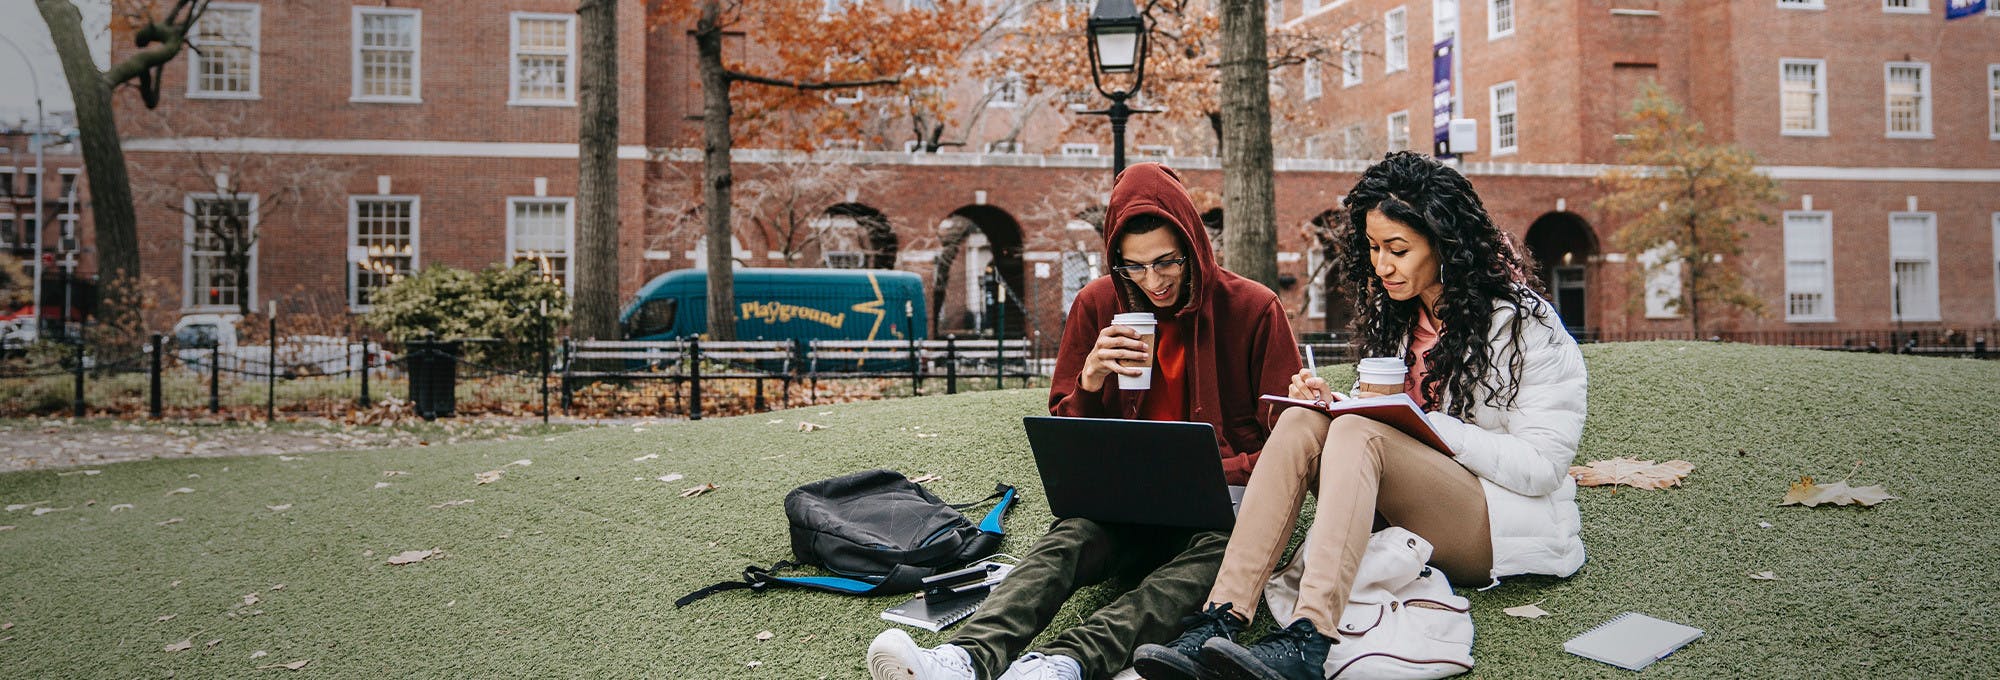 Two freshmen college students sitting outside on campus grounds